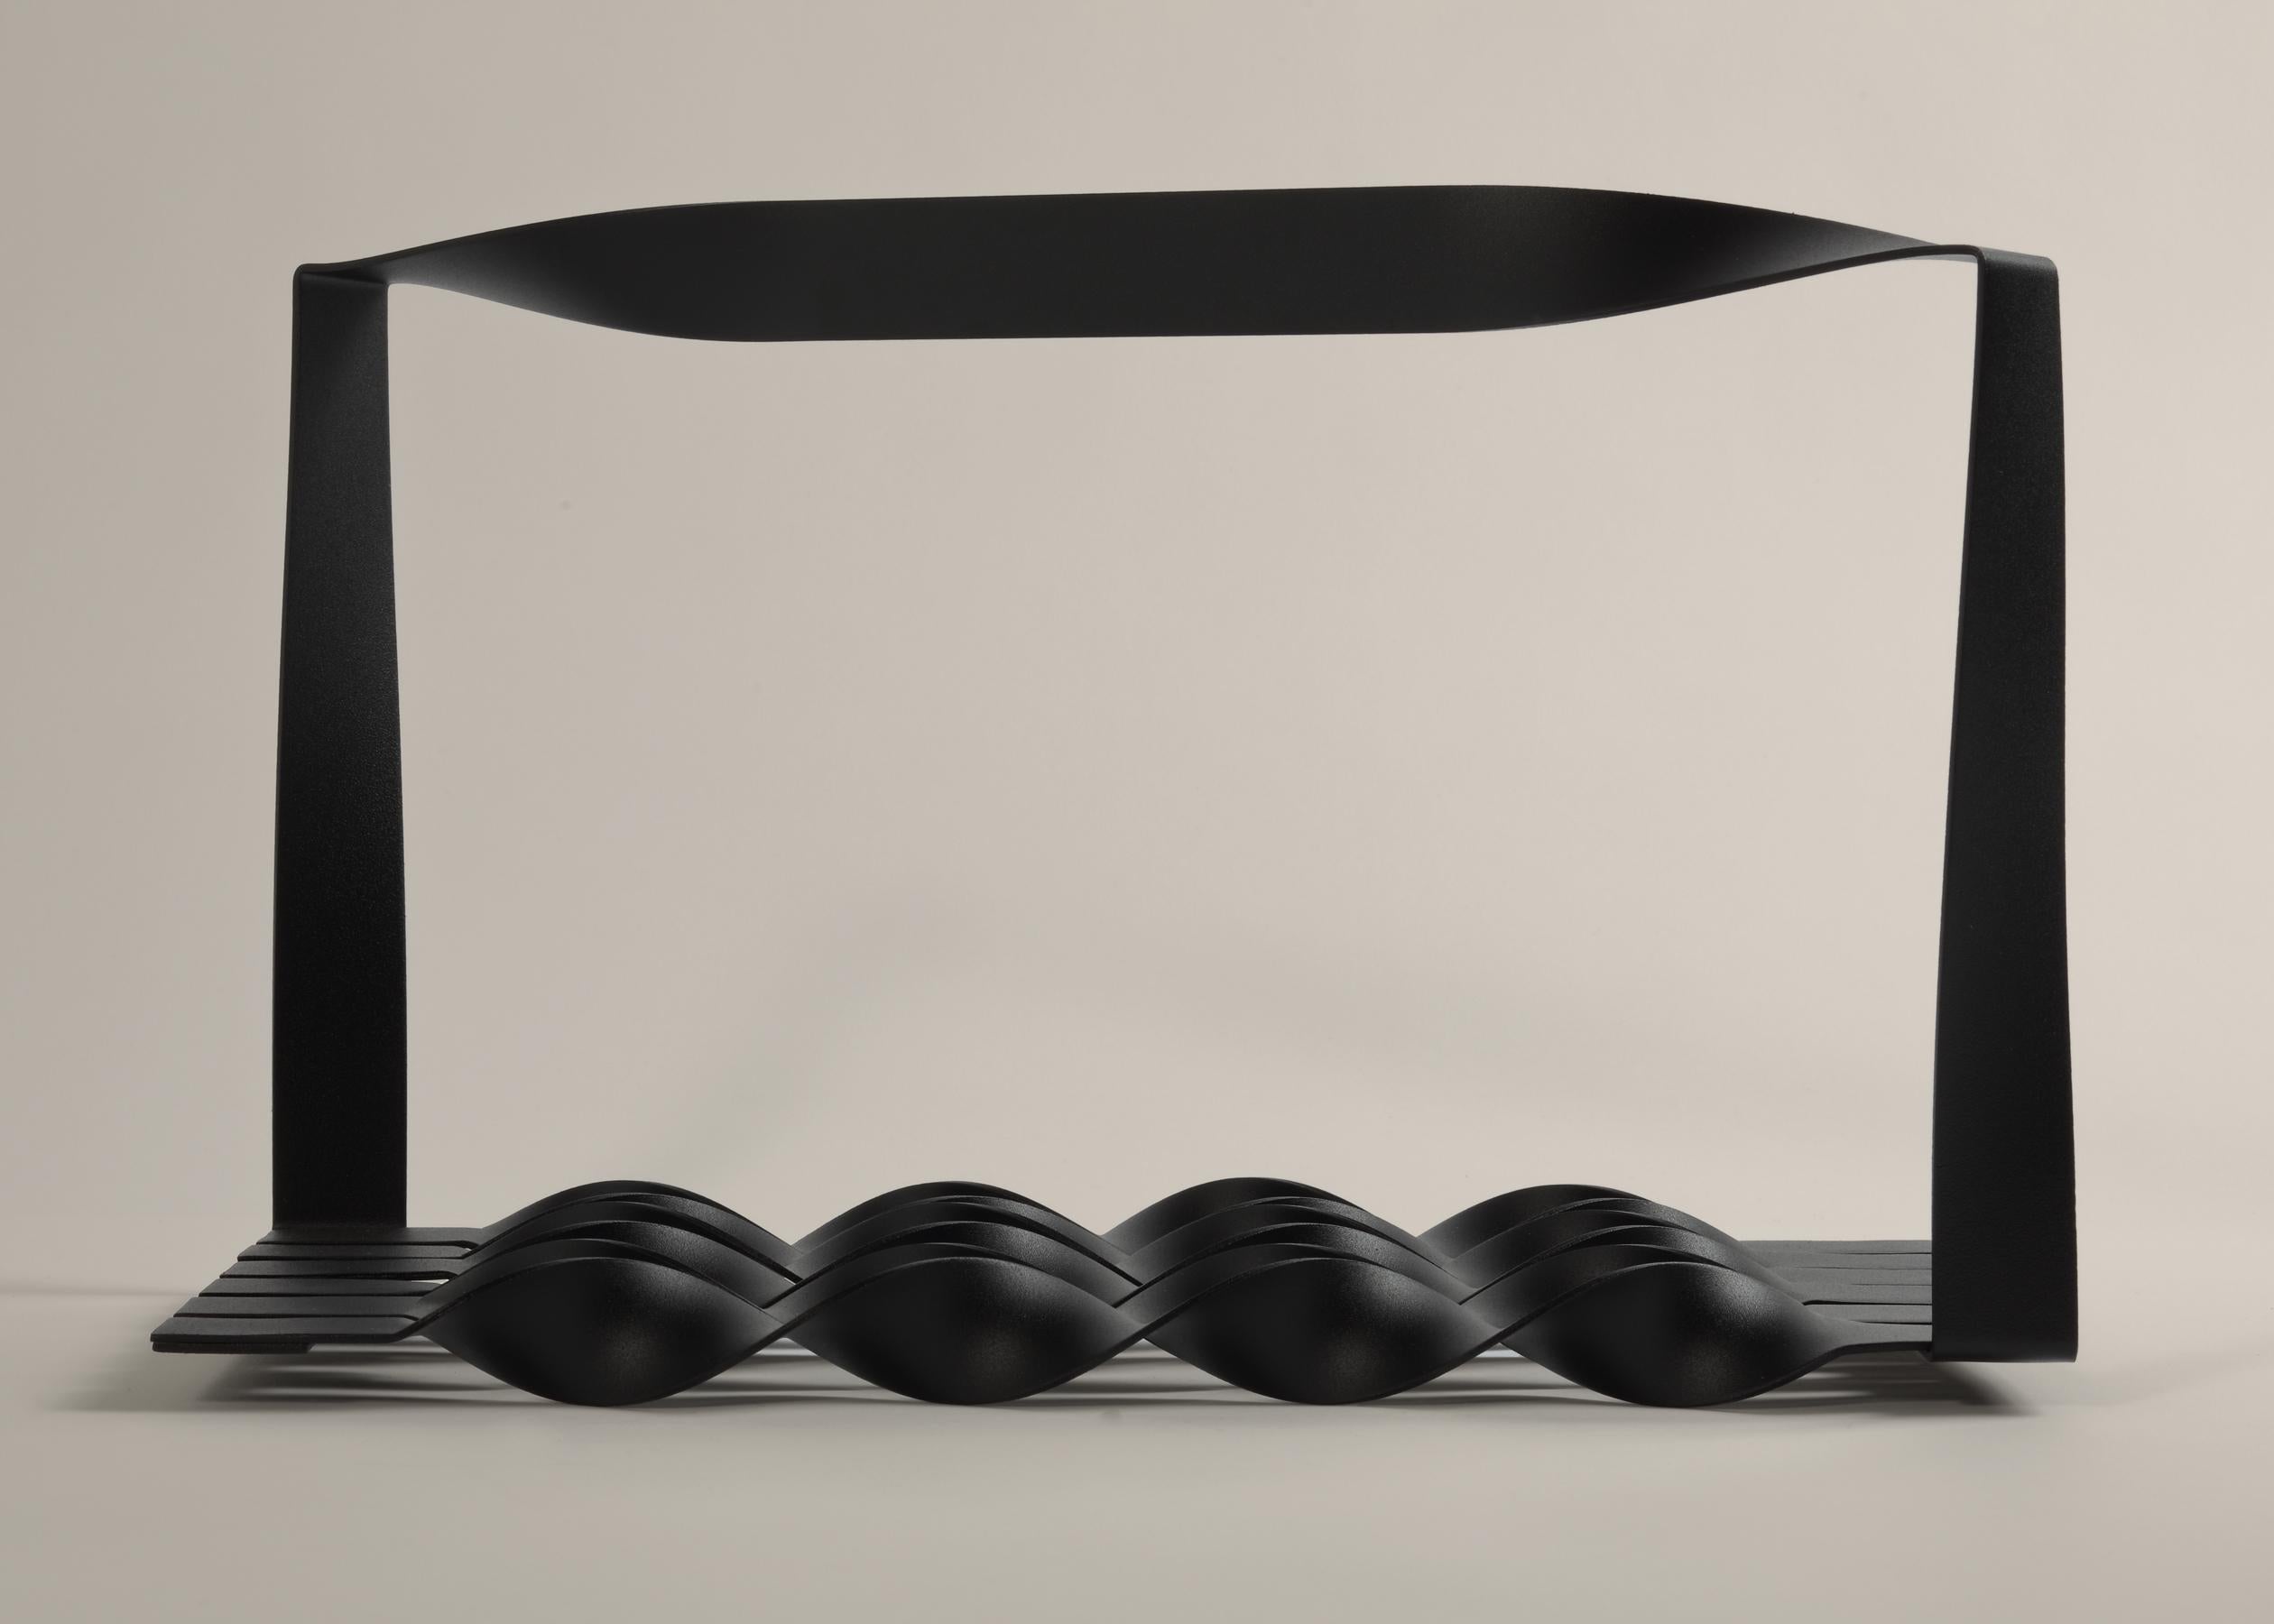 Designer Michael Schoner was inspired for this fruit rack by traditional blacksmith detailing, which he reinterprets to create a steel fruit rack black-coated in black where the fruits rest on the horizontal spirals. Heading towards countering,